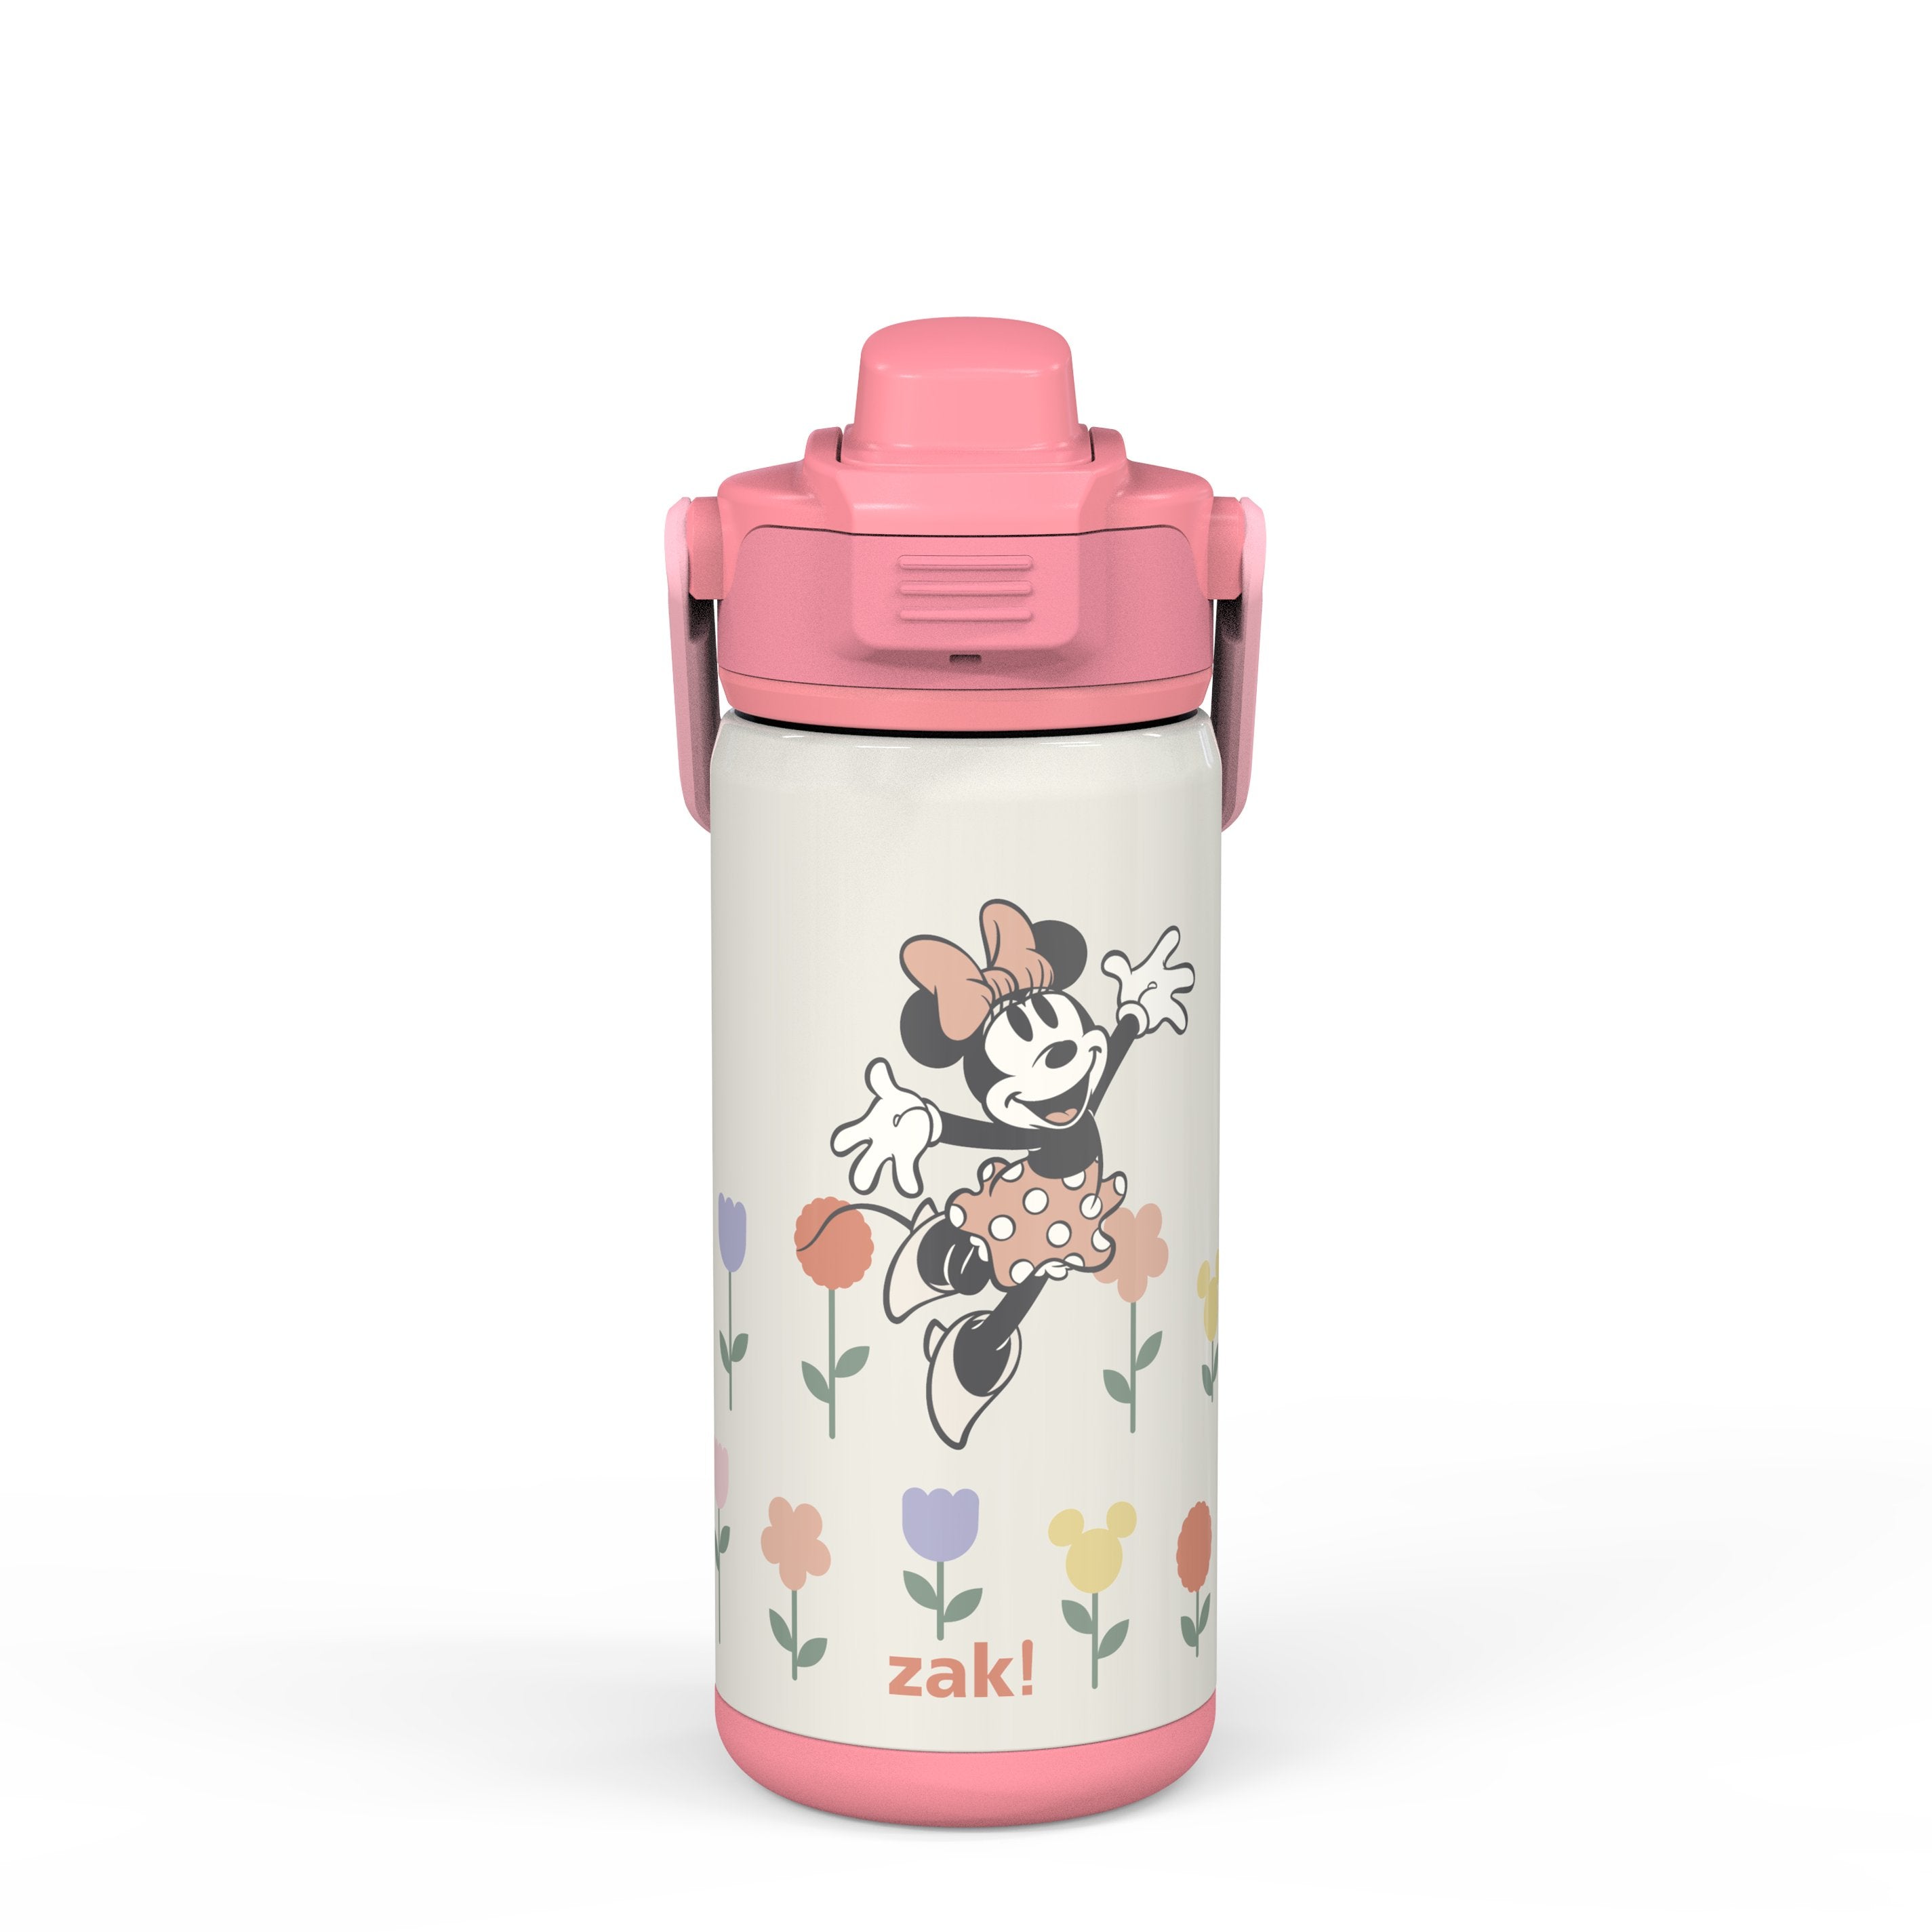 Lowest Price: Zak Designs Disney Mickey Mouse Vacuum Insulated  Stainless Steel Travel Tumbler with Splash-Proof Lid